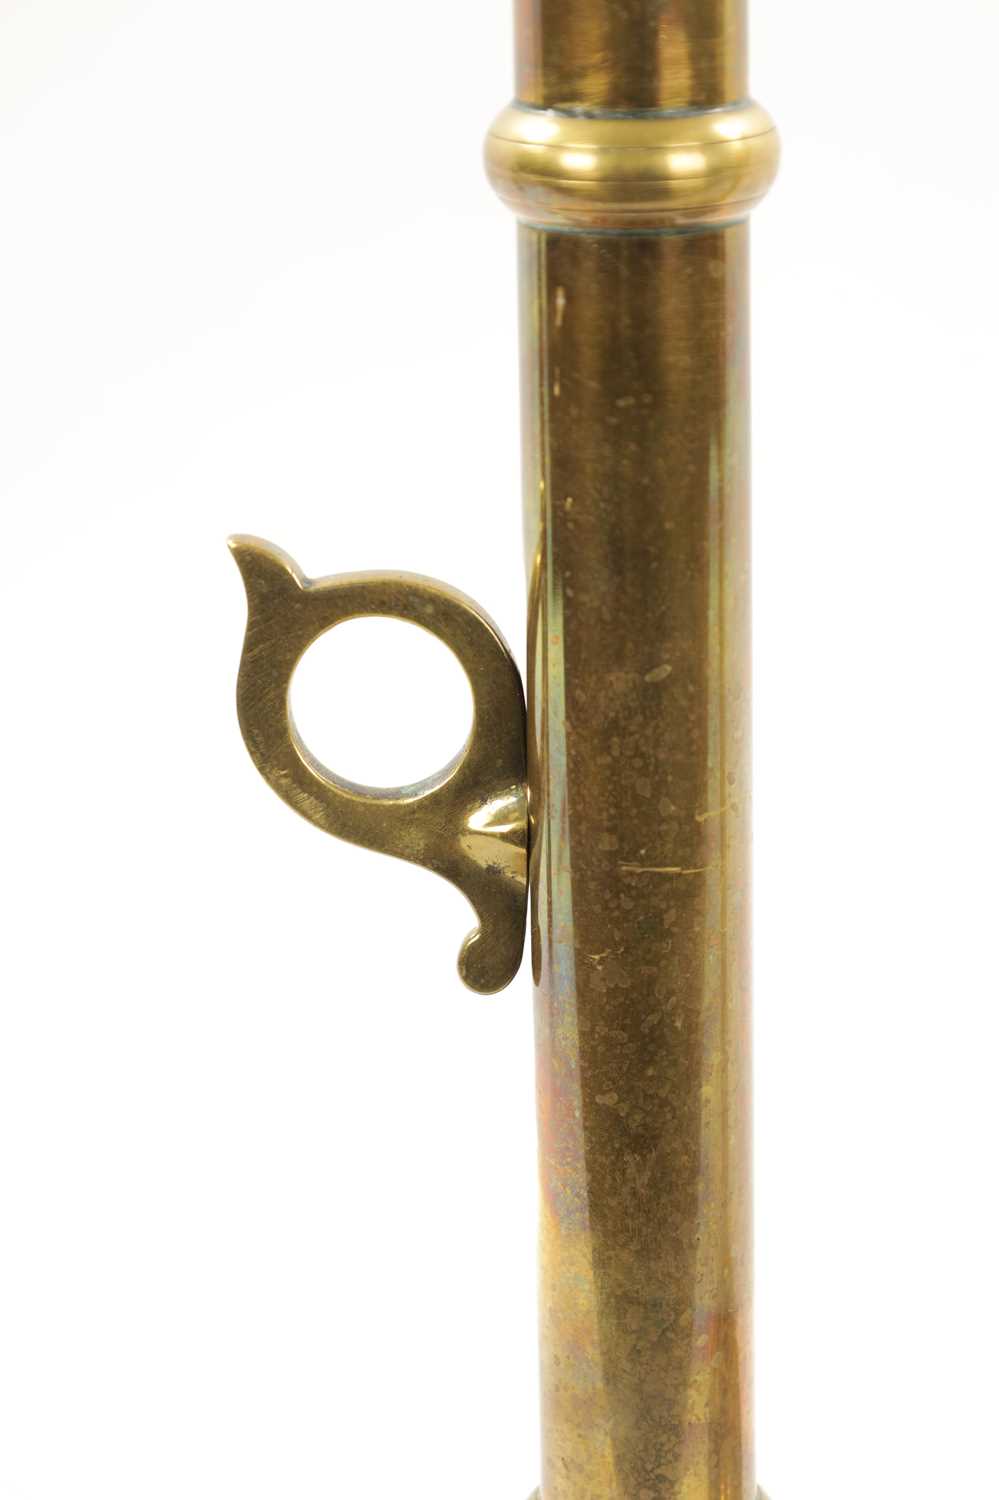 A PAIR OF LARGE 19TH CENTURY BRASS EJECTOR 'PULPIT' BRASS CANDLESTICKS - Image 3 of 7